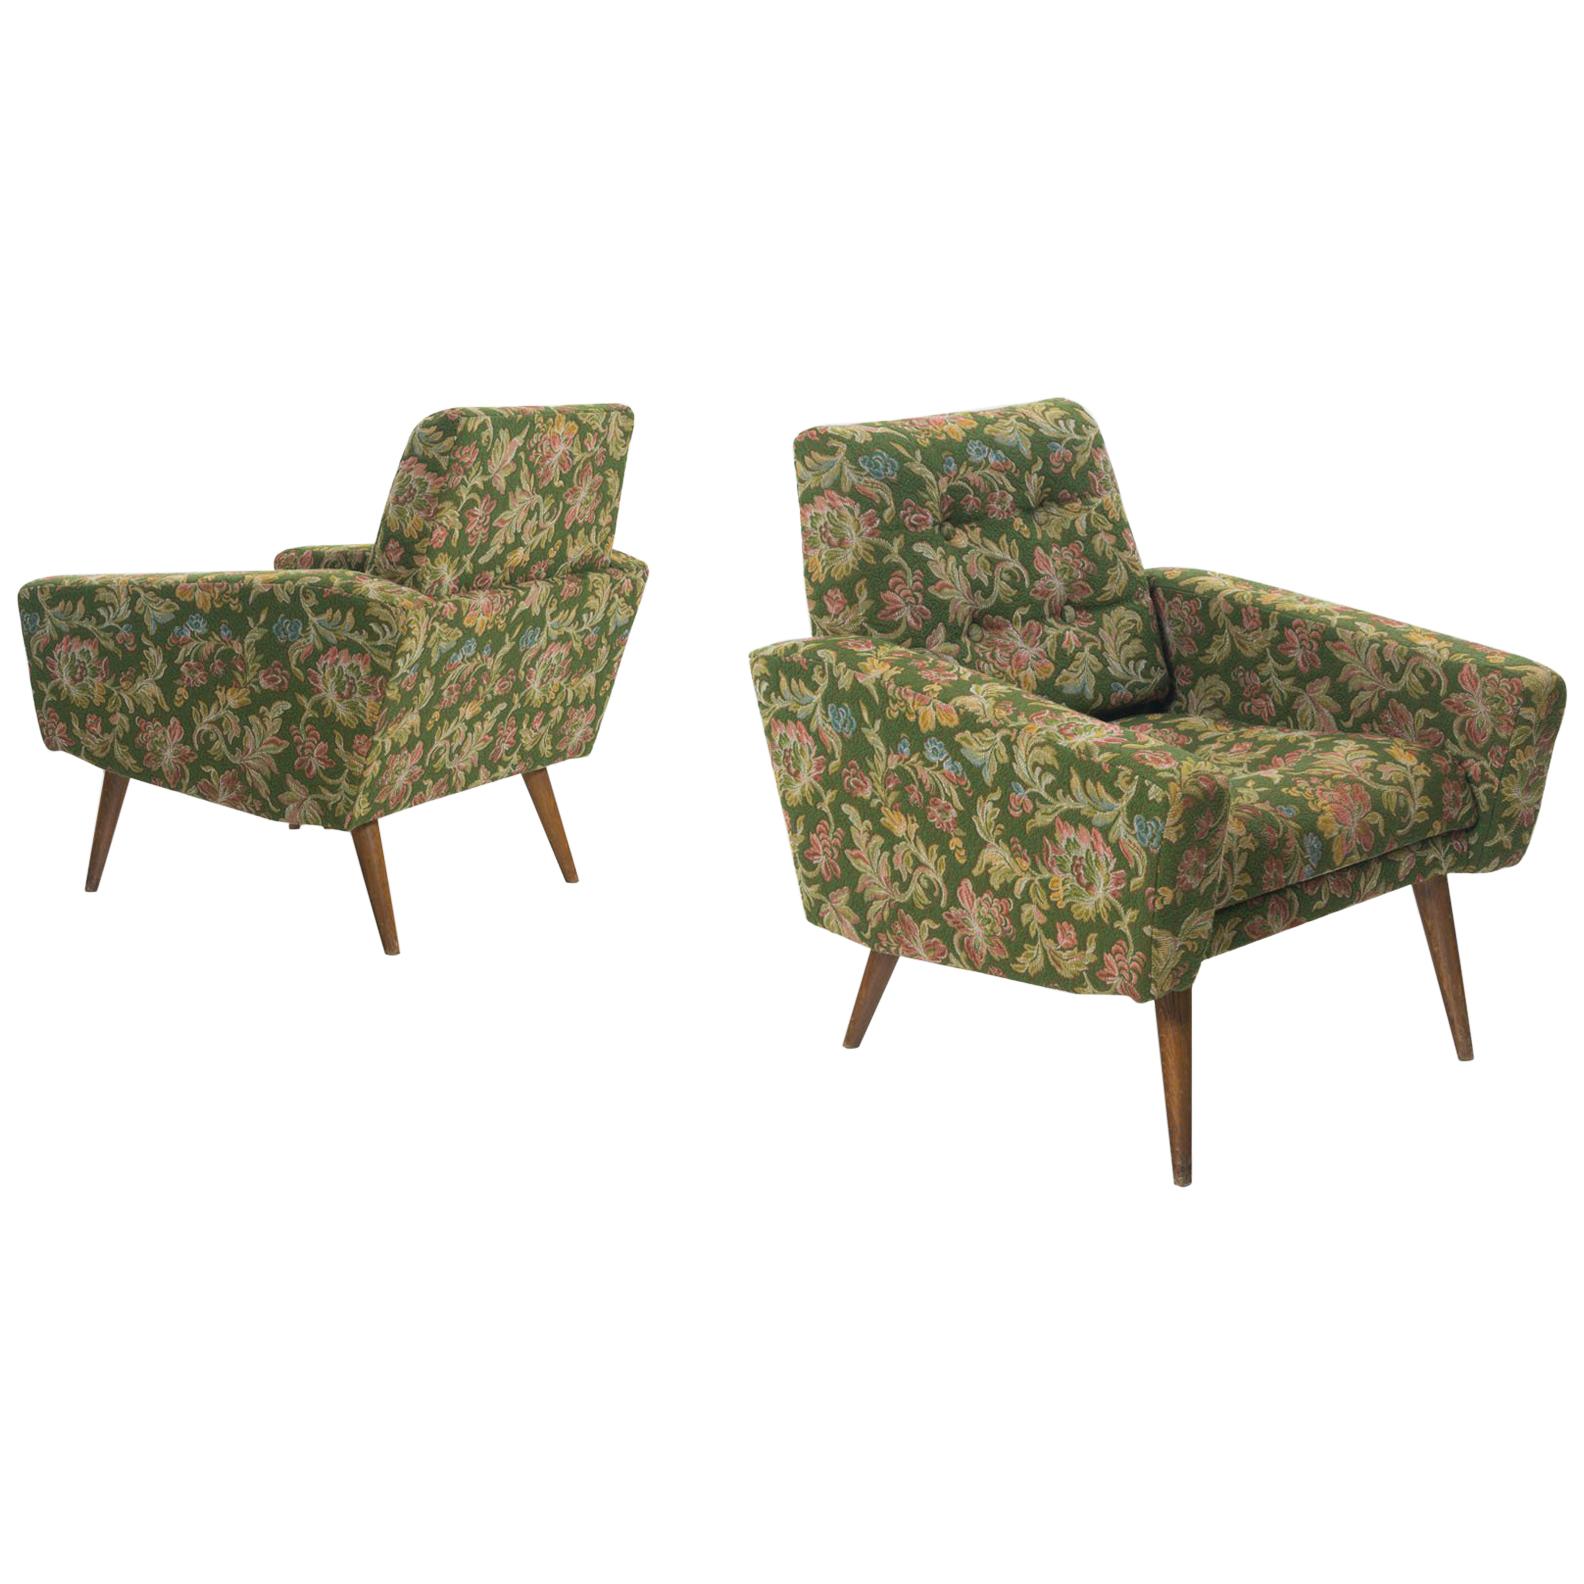 Set of Lounge Chairs in Green Floral Upholstery For Sale